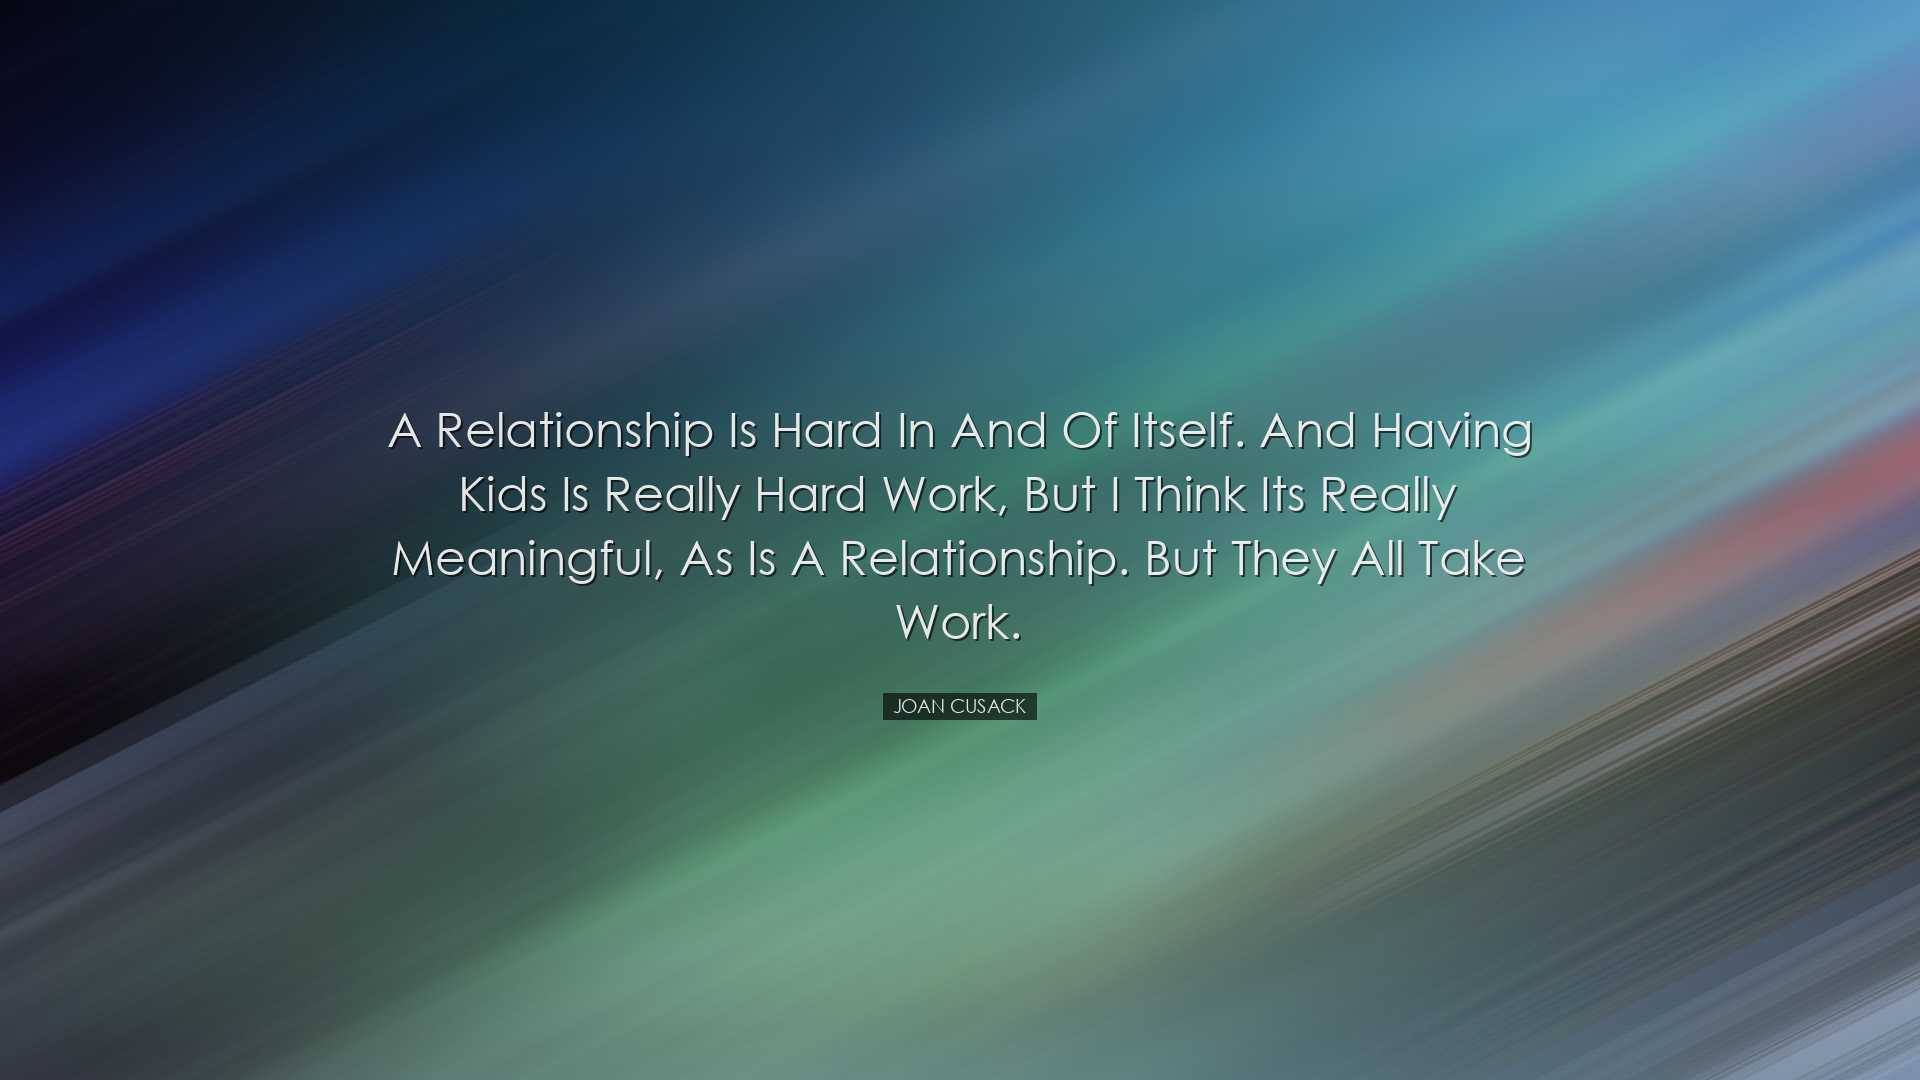 A relationship is hard in and of itself. And having kids is really